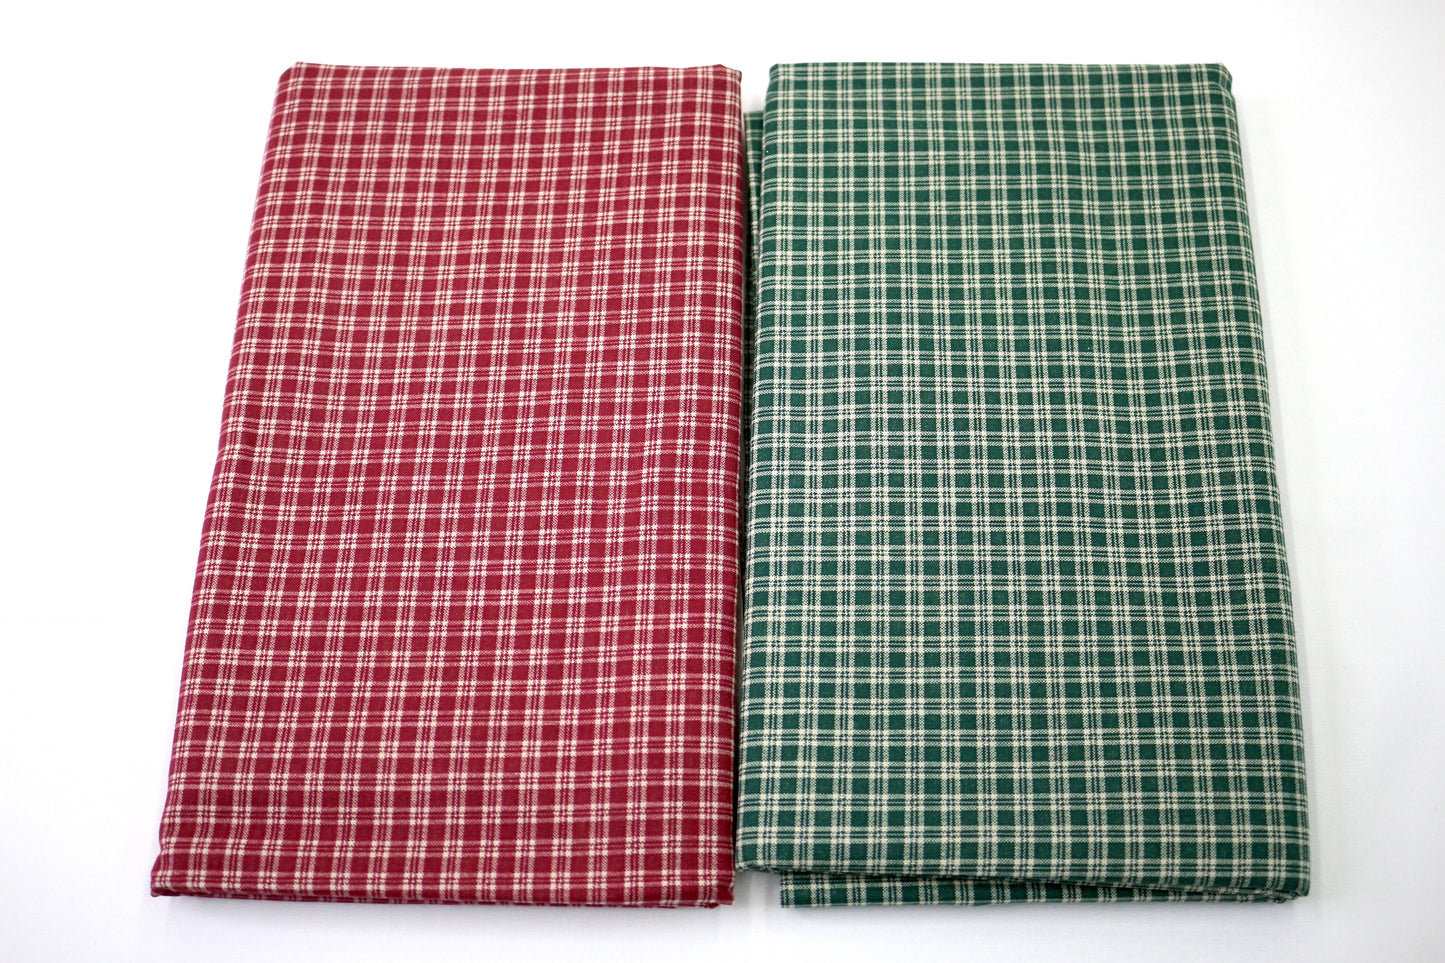 Cottage Comfy Red & Green Cotton Fabric Bundle